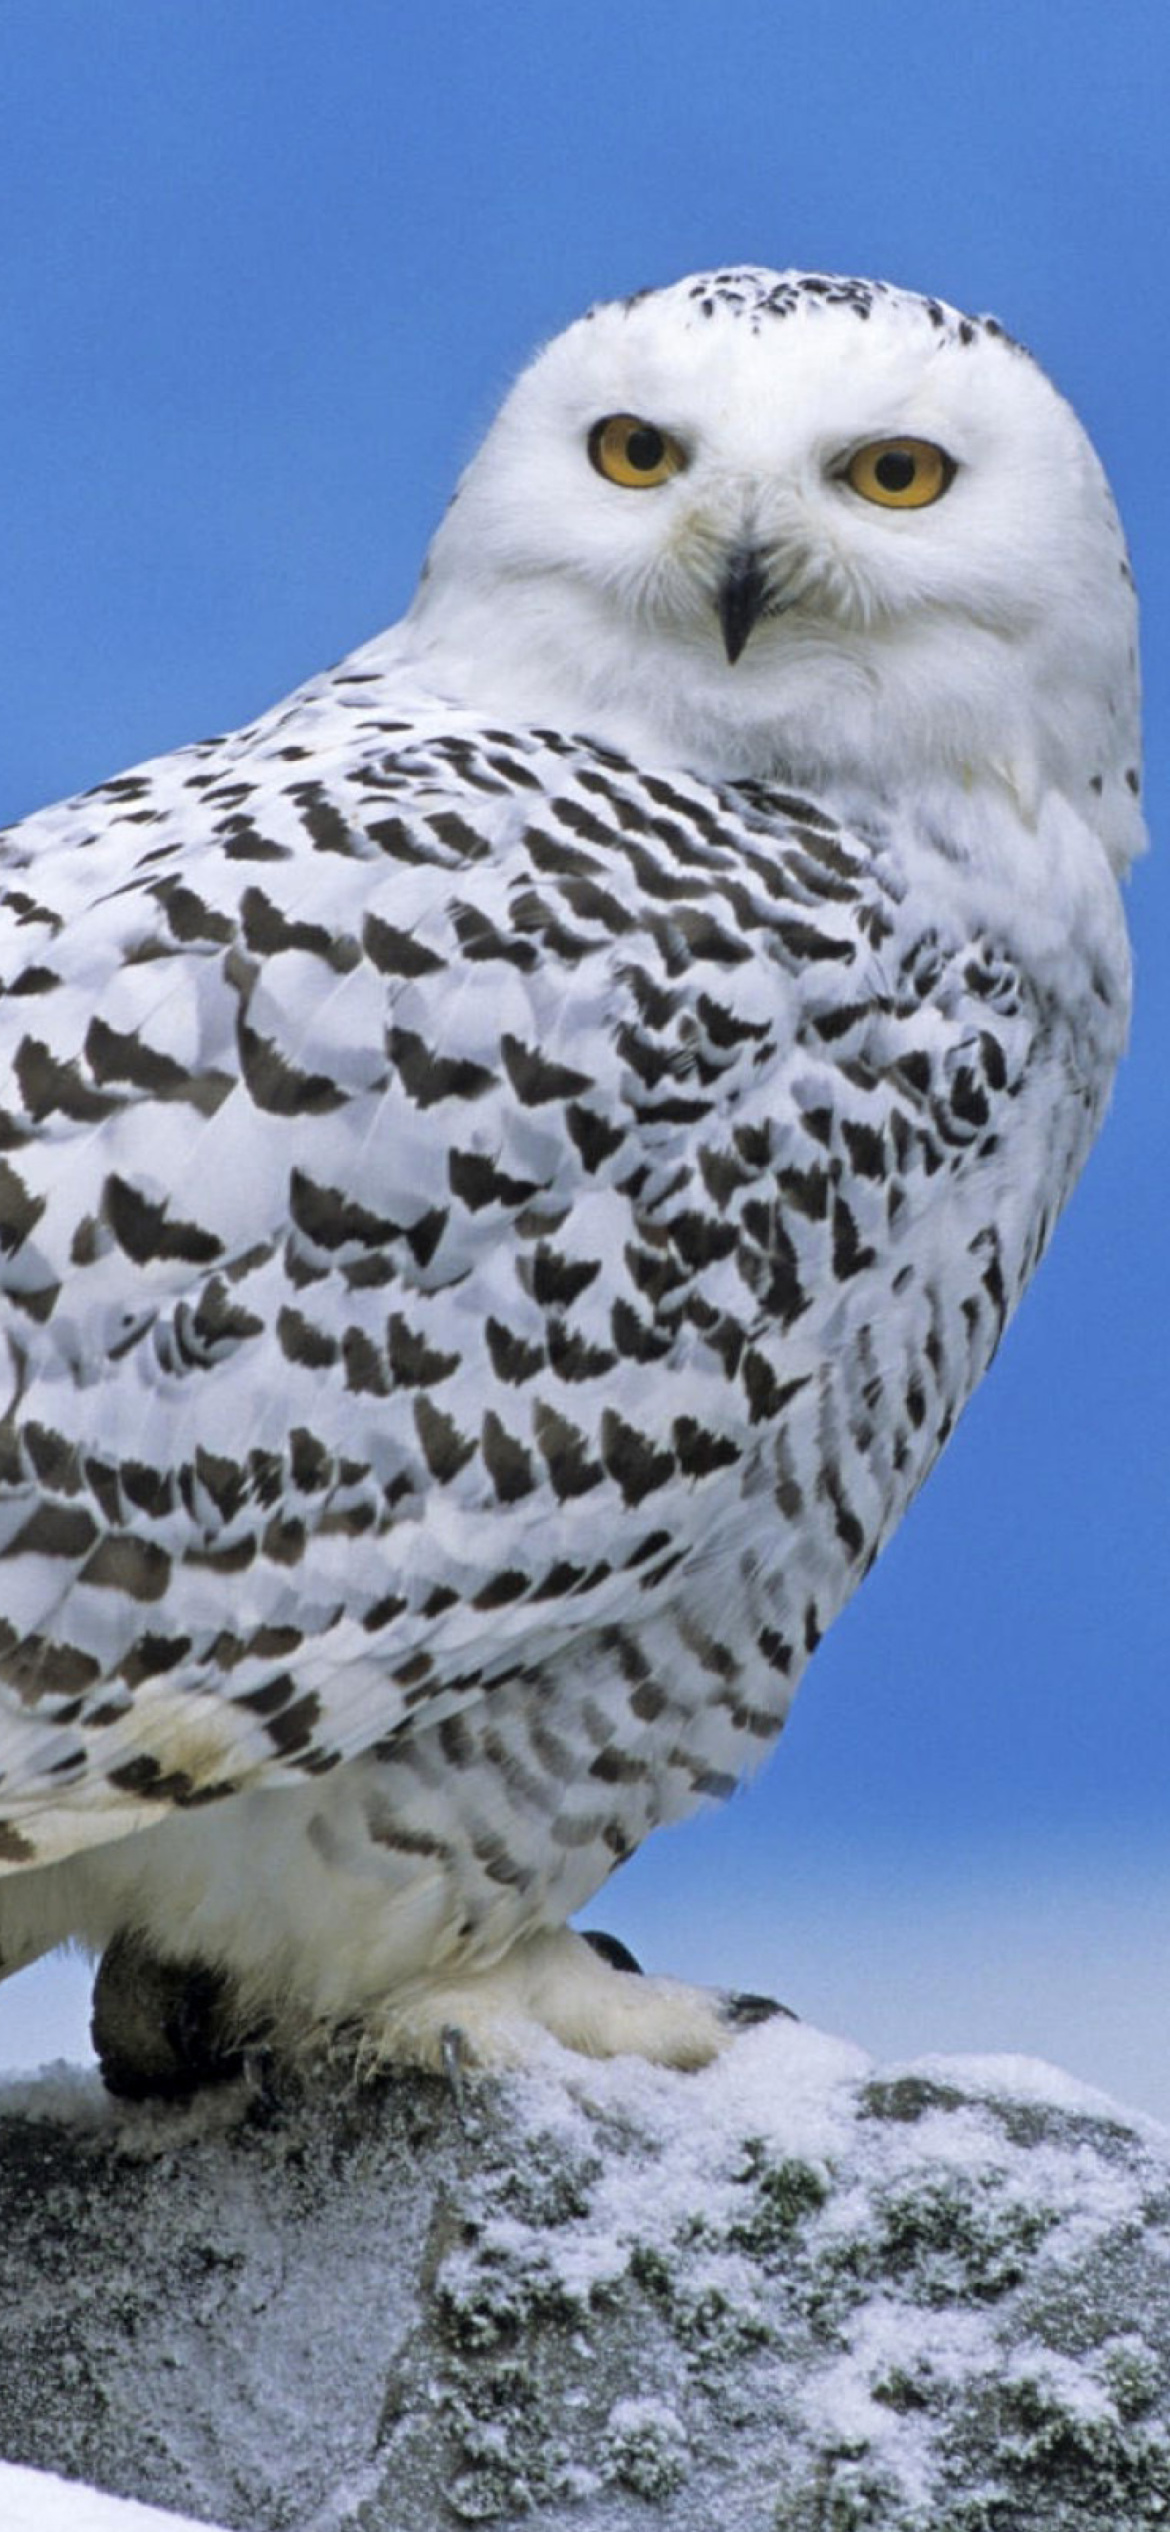 Snowy owl from Arctic wallpaper 1170x2532